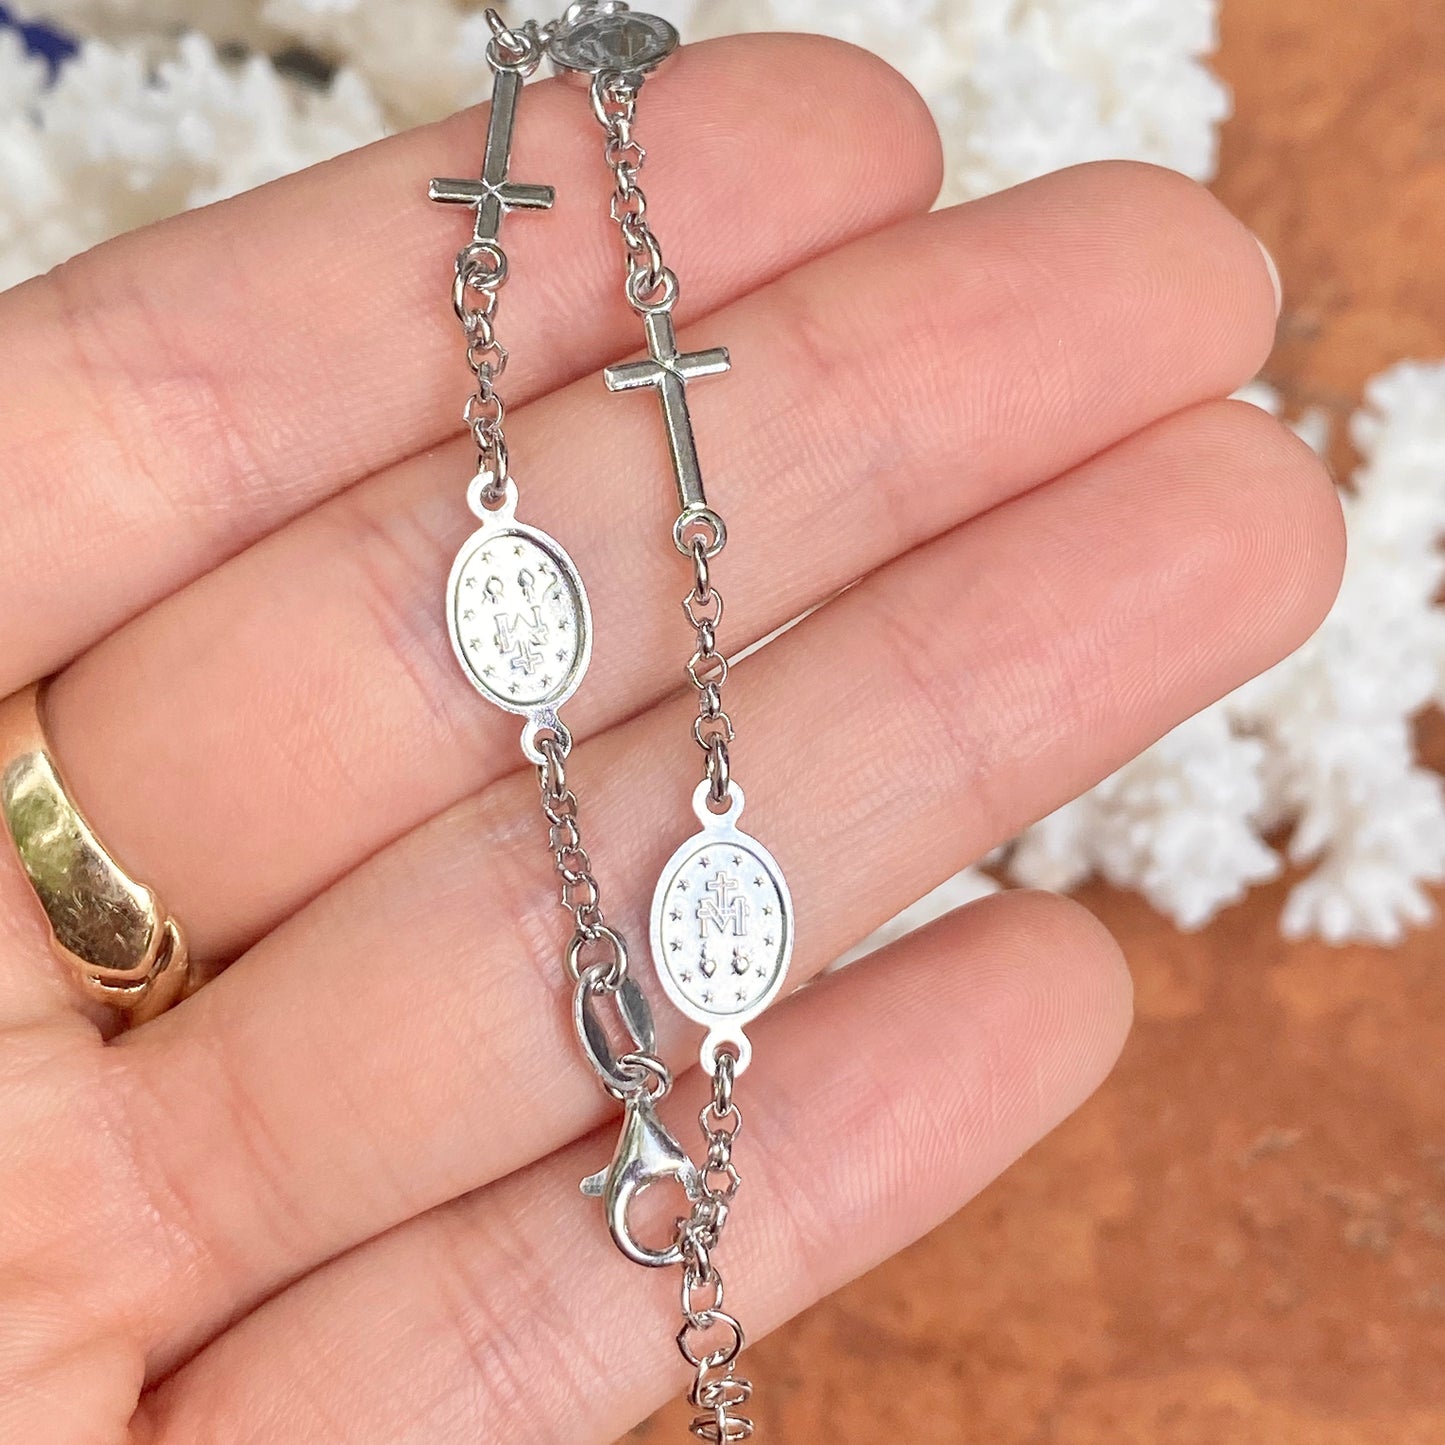 Sterling Silver Cross + Miraculous Medal Rosary Chain Bracelet